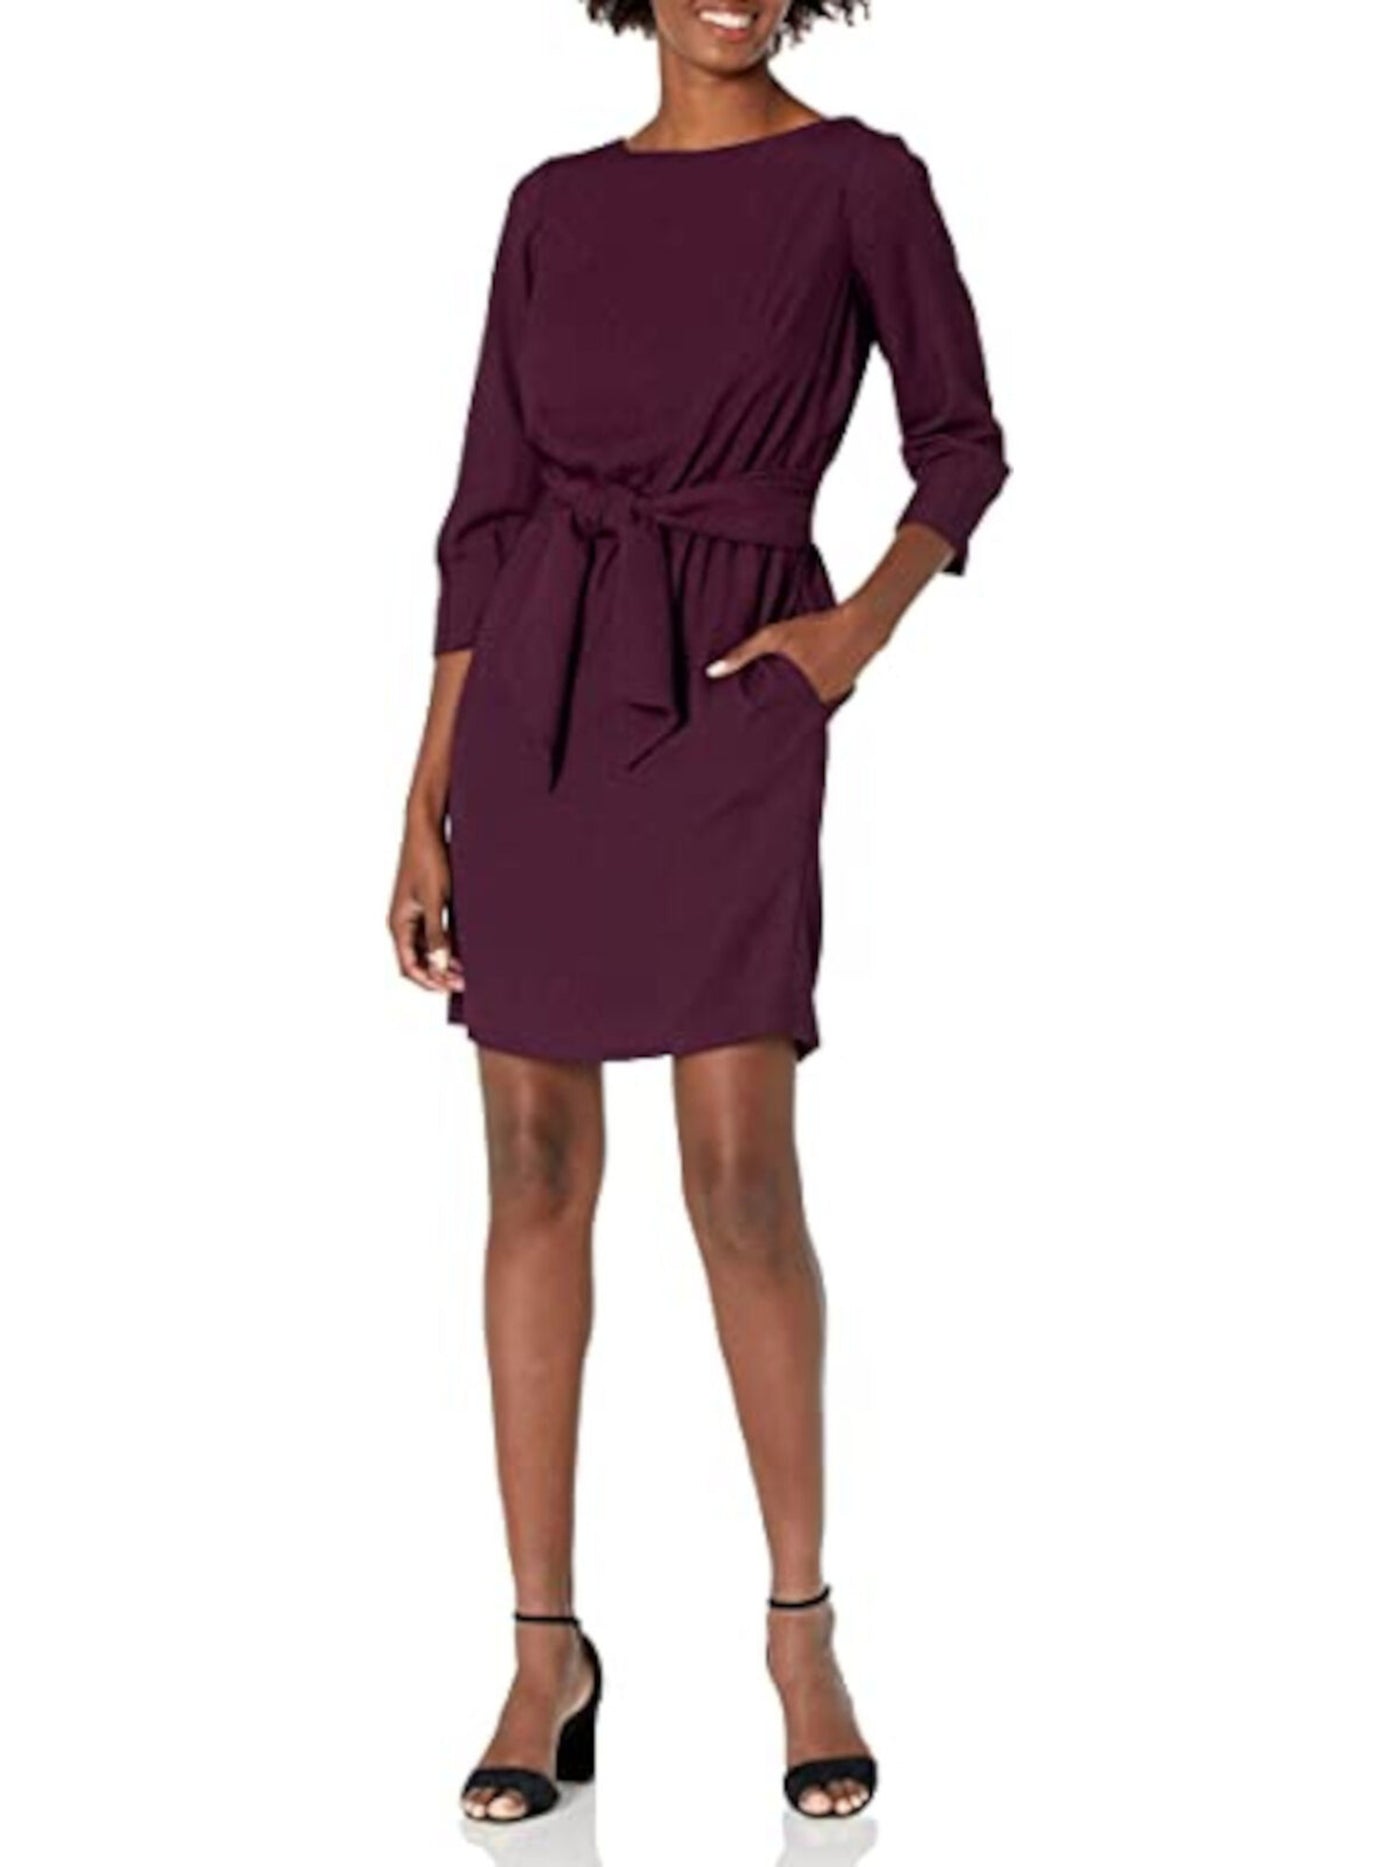 VINCE CAMUTO Womens Burgundy Smocked Pleated Self Tie Waist Scuba Crepe Butto 3/4 Sleeve Boat Neck Above The Knee Wear To Work Sheath Dress Petites 2P